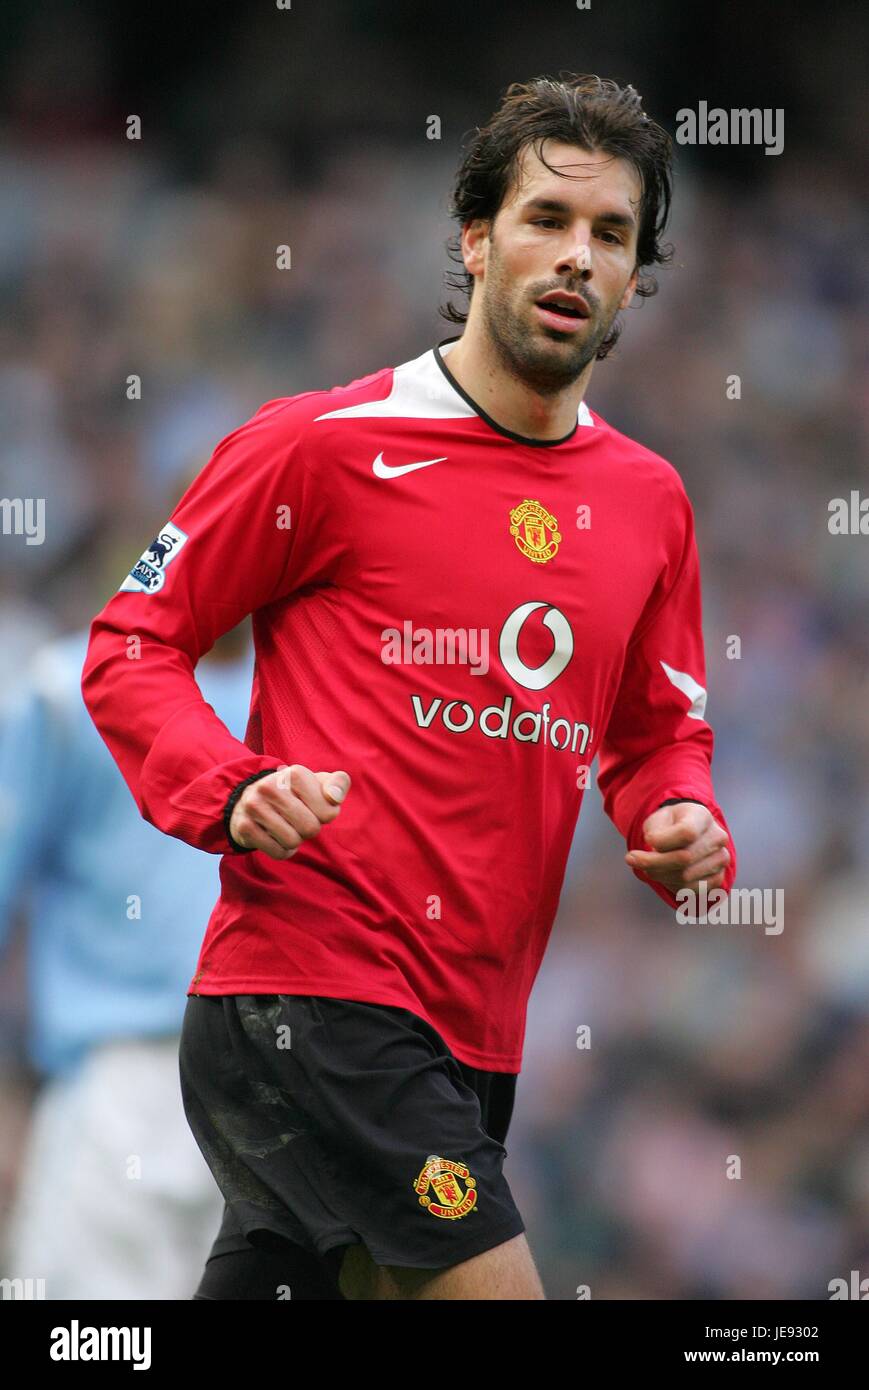 RUUD VAN NISTELROOY MANCHESTER UNITED FC CITY OF MANCHESTER STADIUM MANCHESTER ENGLAND 14 January 2006 Stock Photo